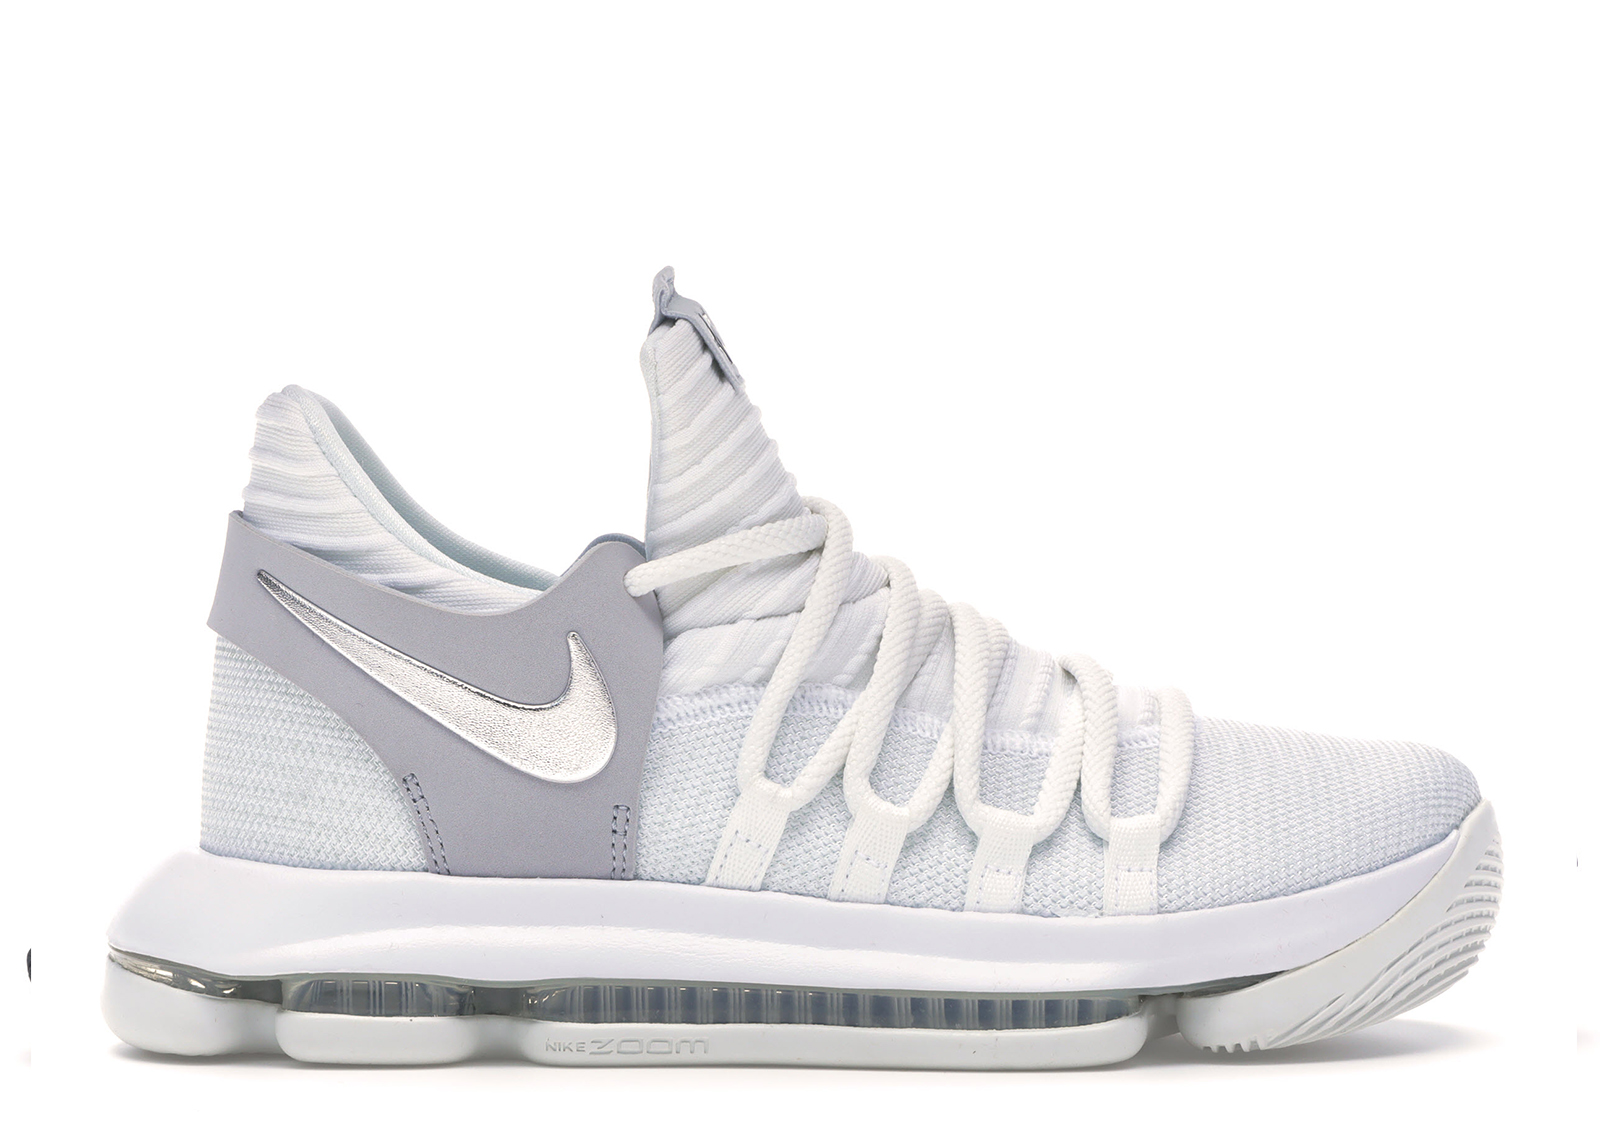 Buy Nike KD 10 Shoes & New Sneakers - StockX